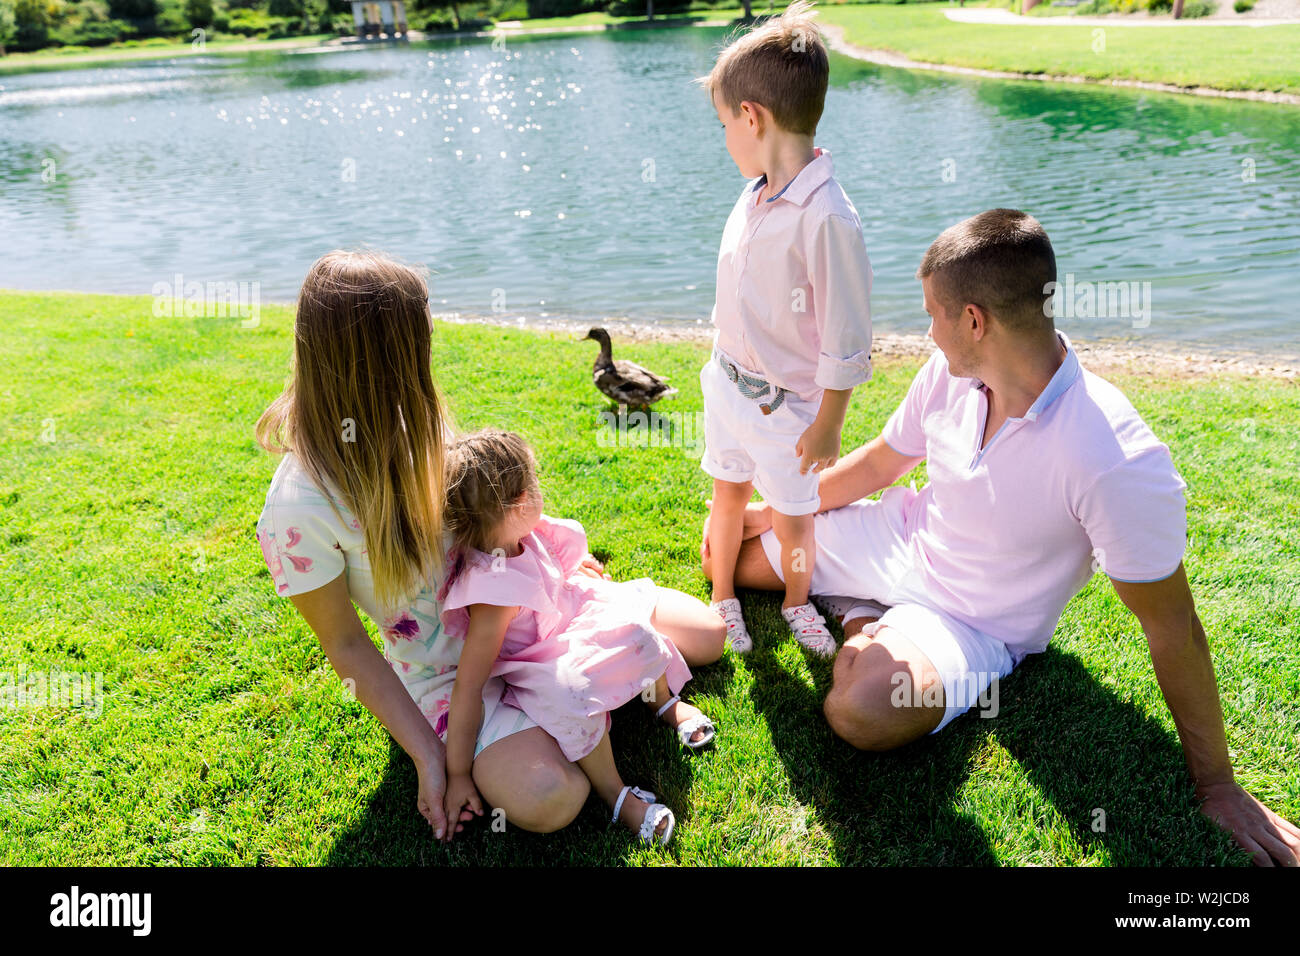 Happy family at the park having a good time together Stock Photo